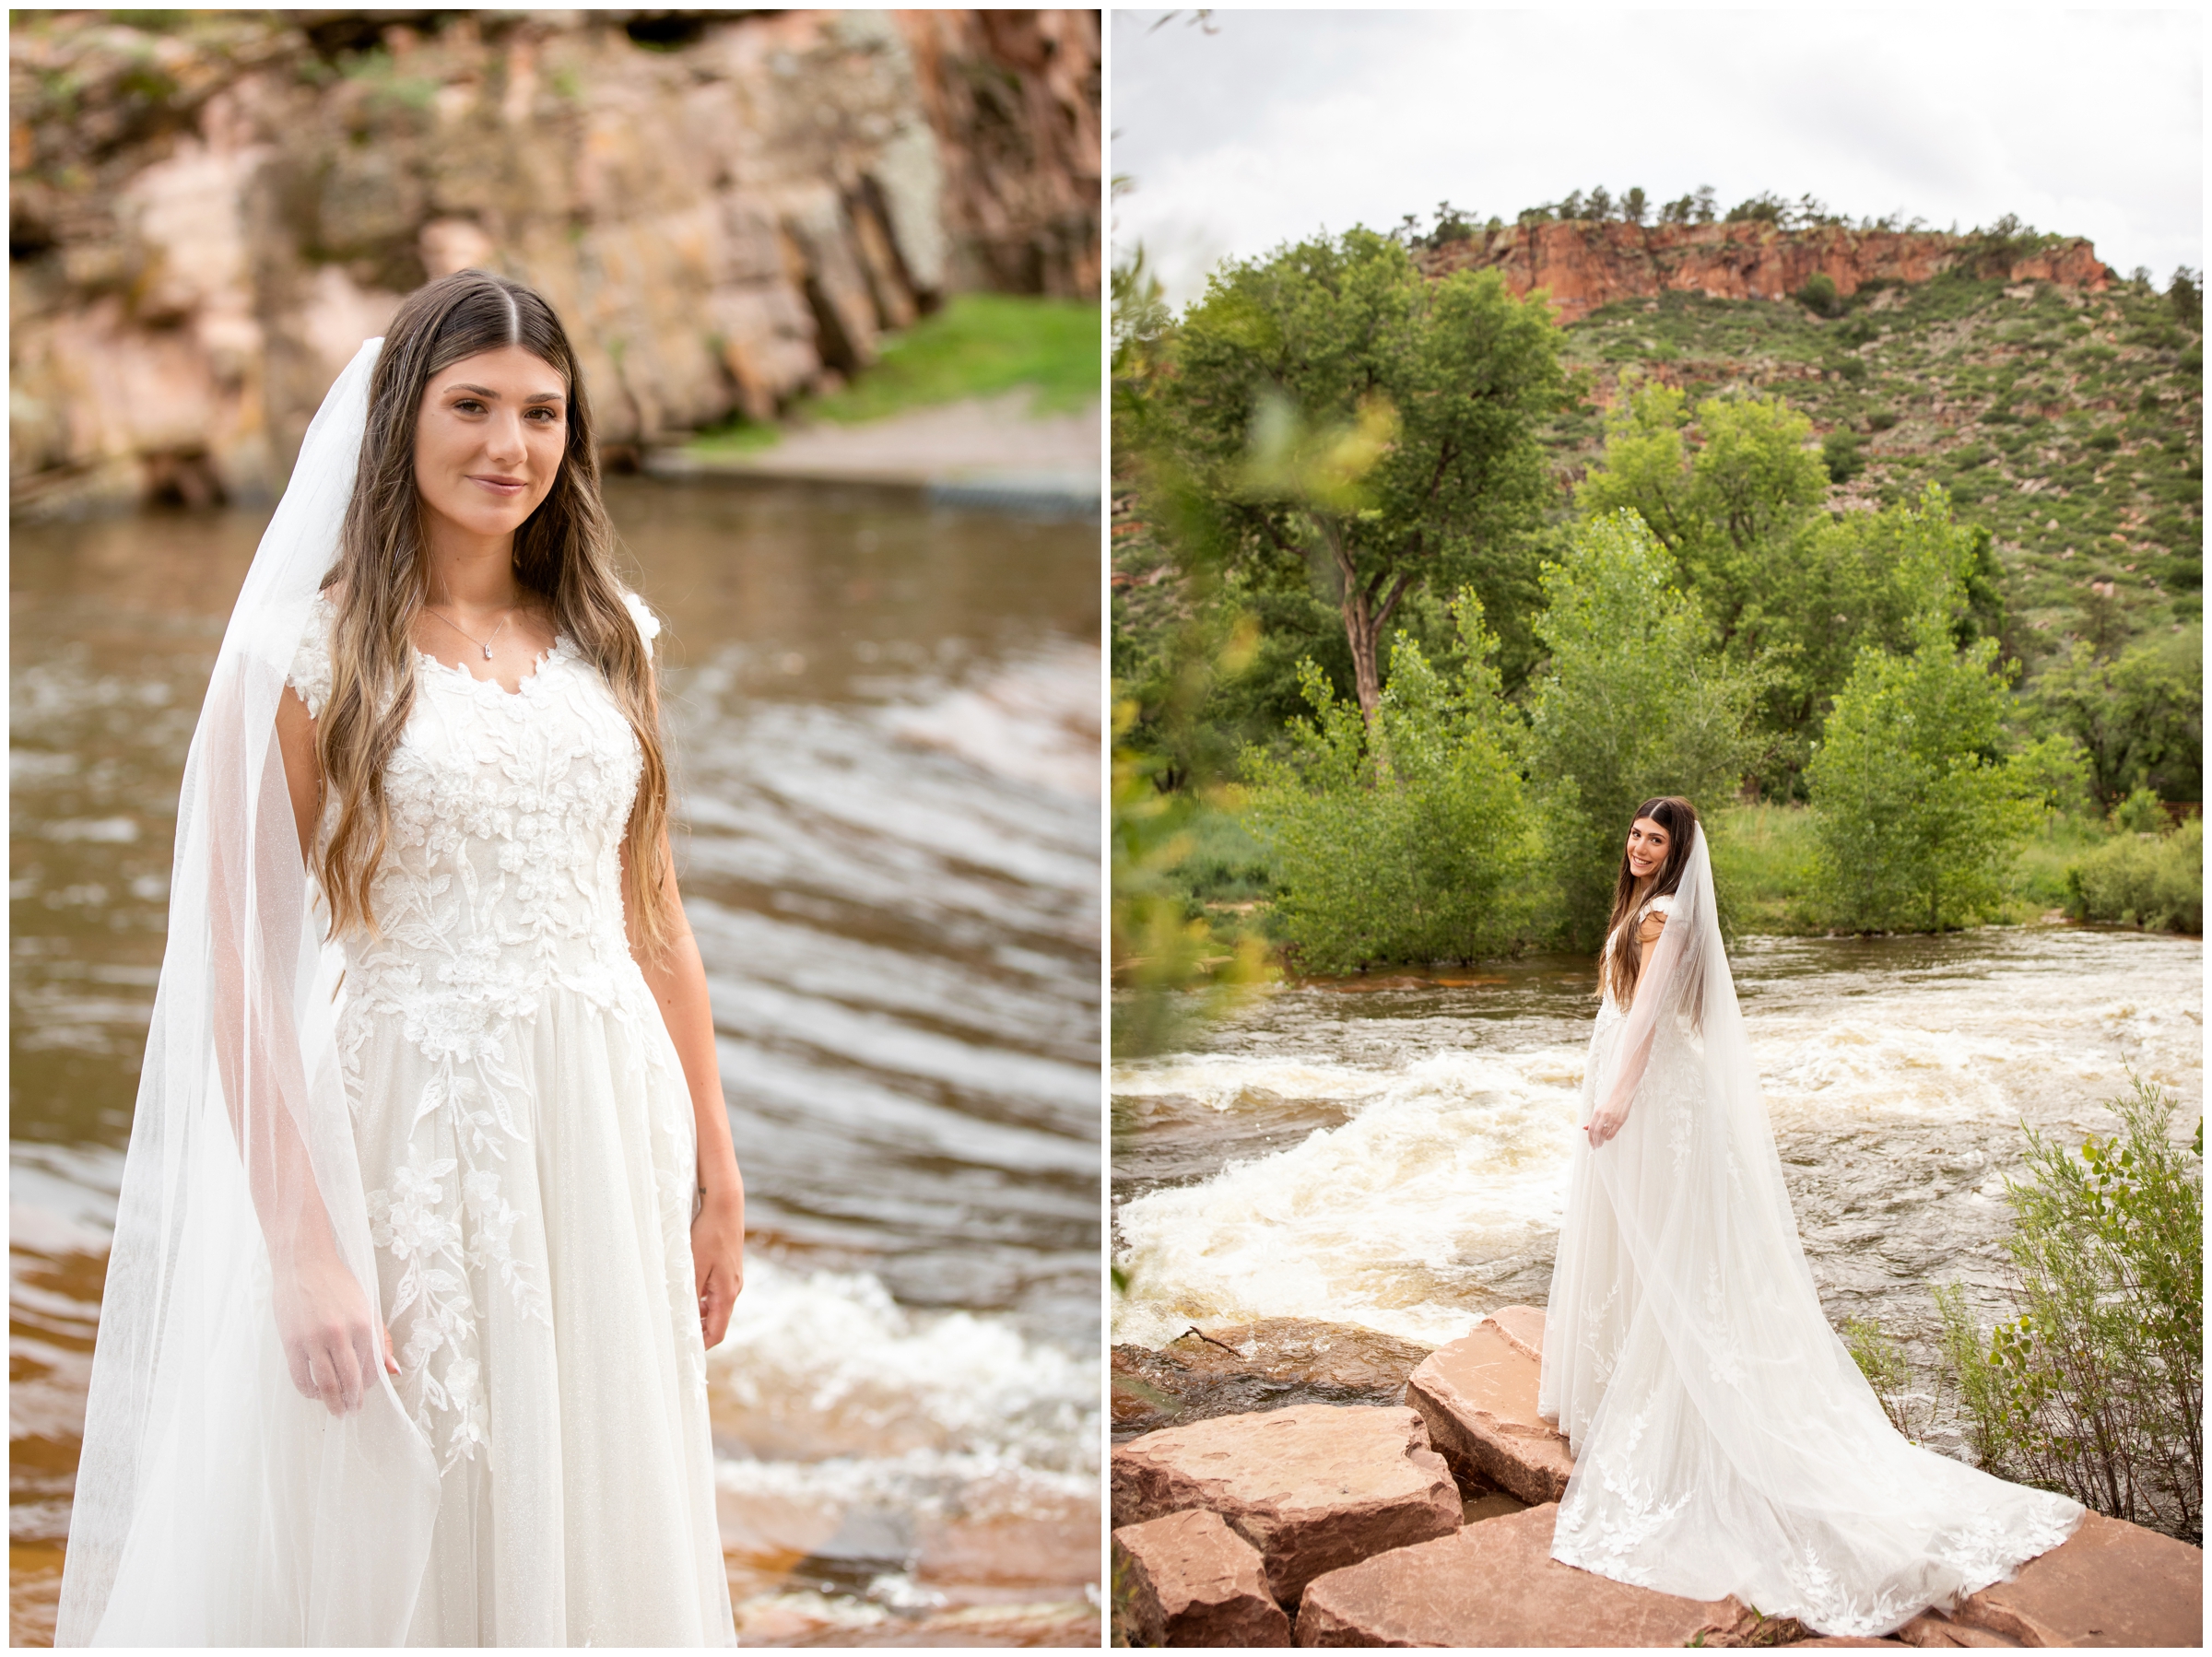 bride with long veil posing next to the river during Colorado elopement wedding pictures at River Bend